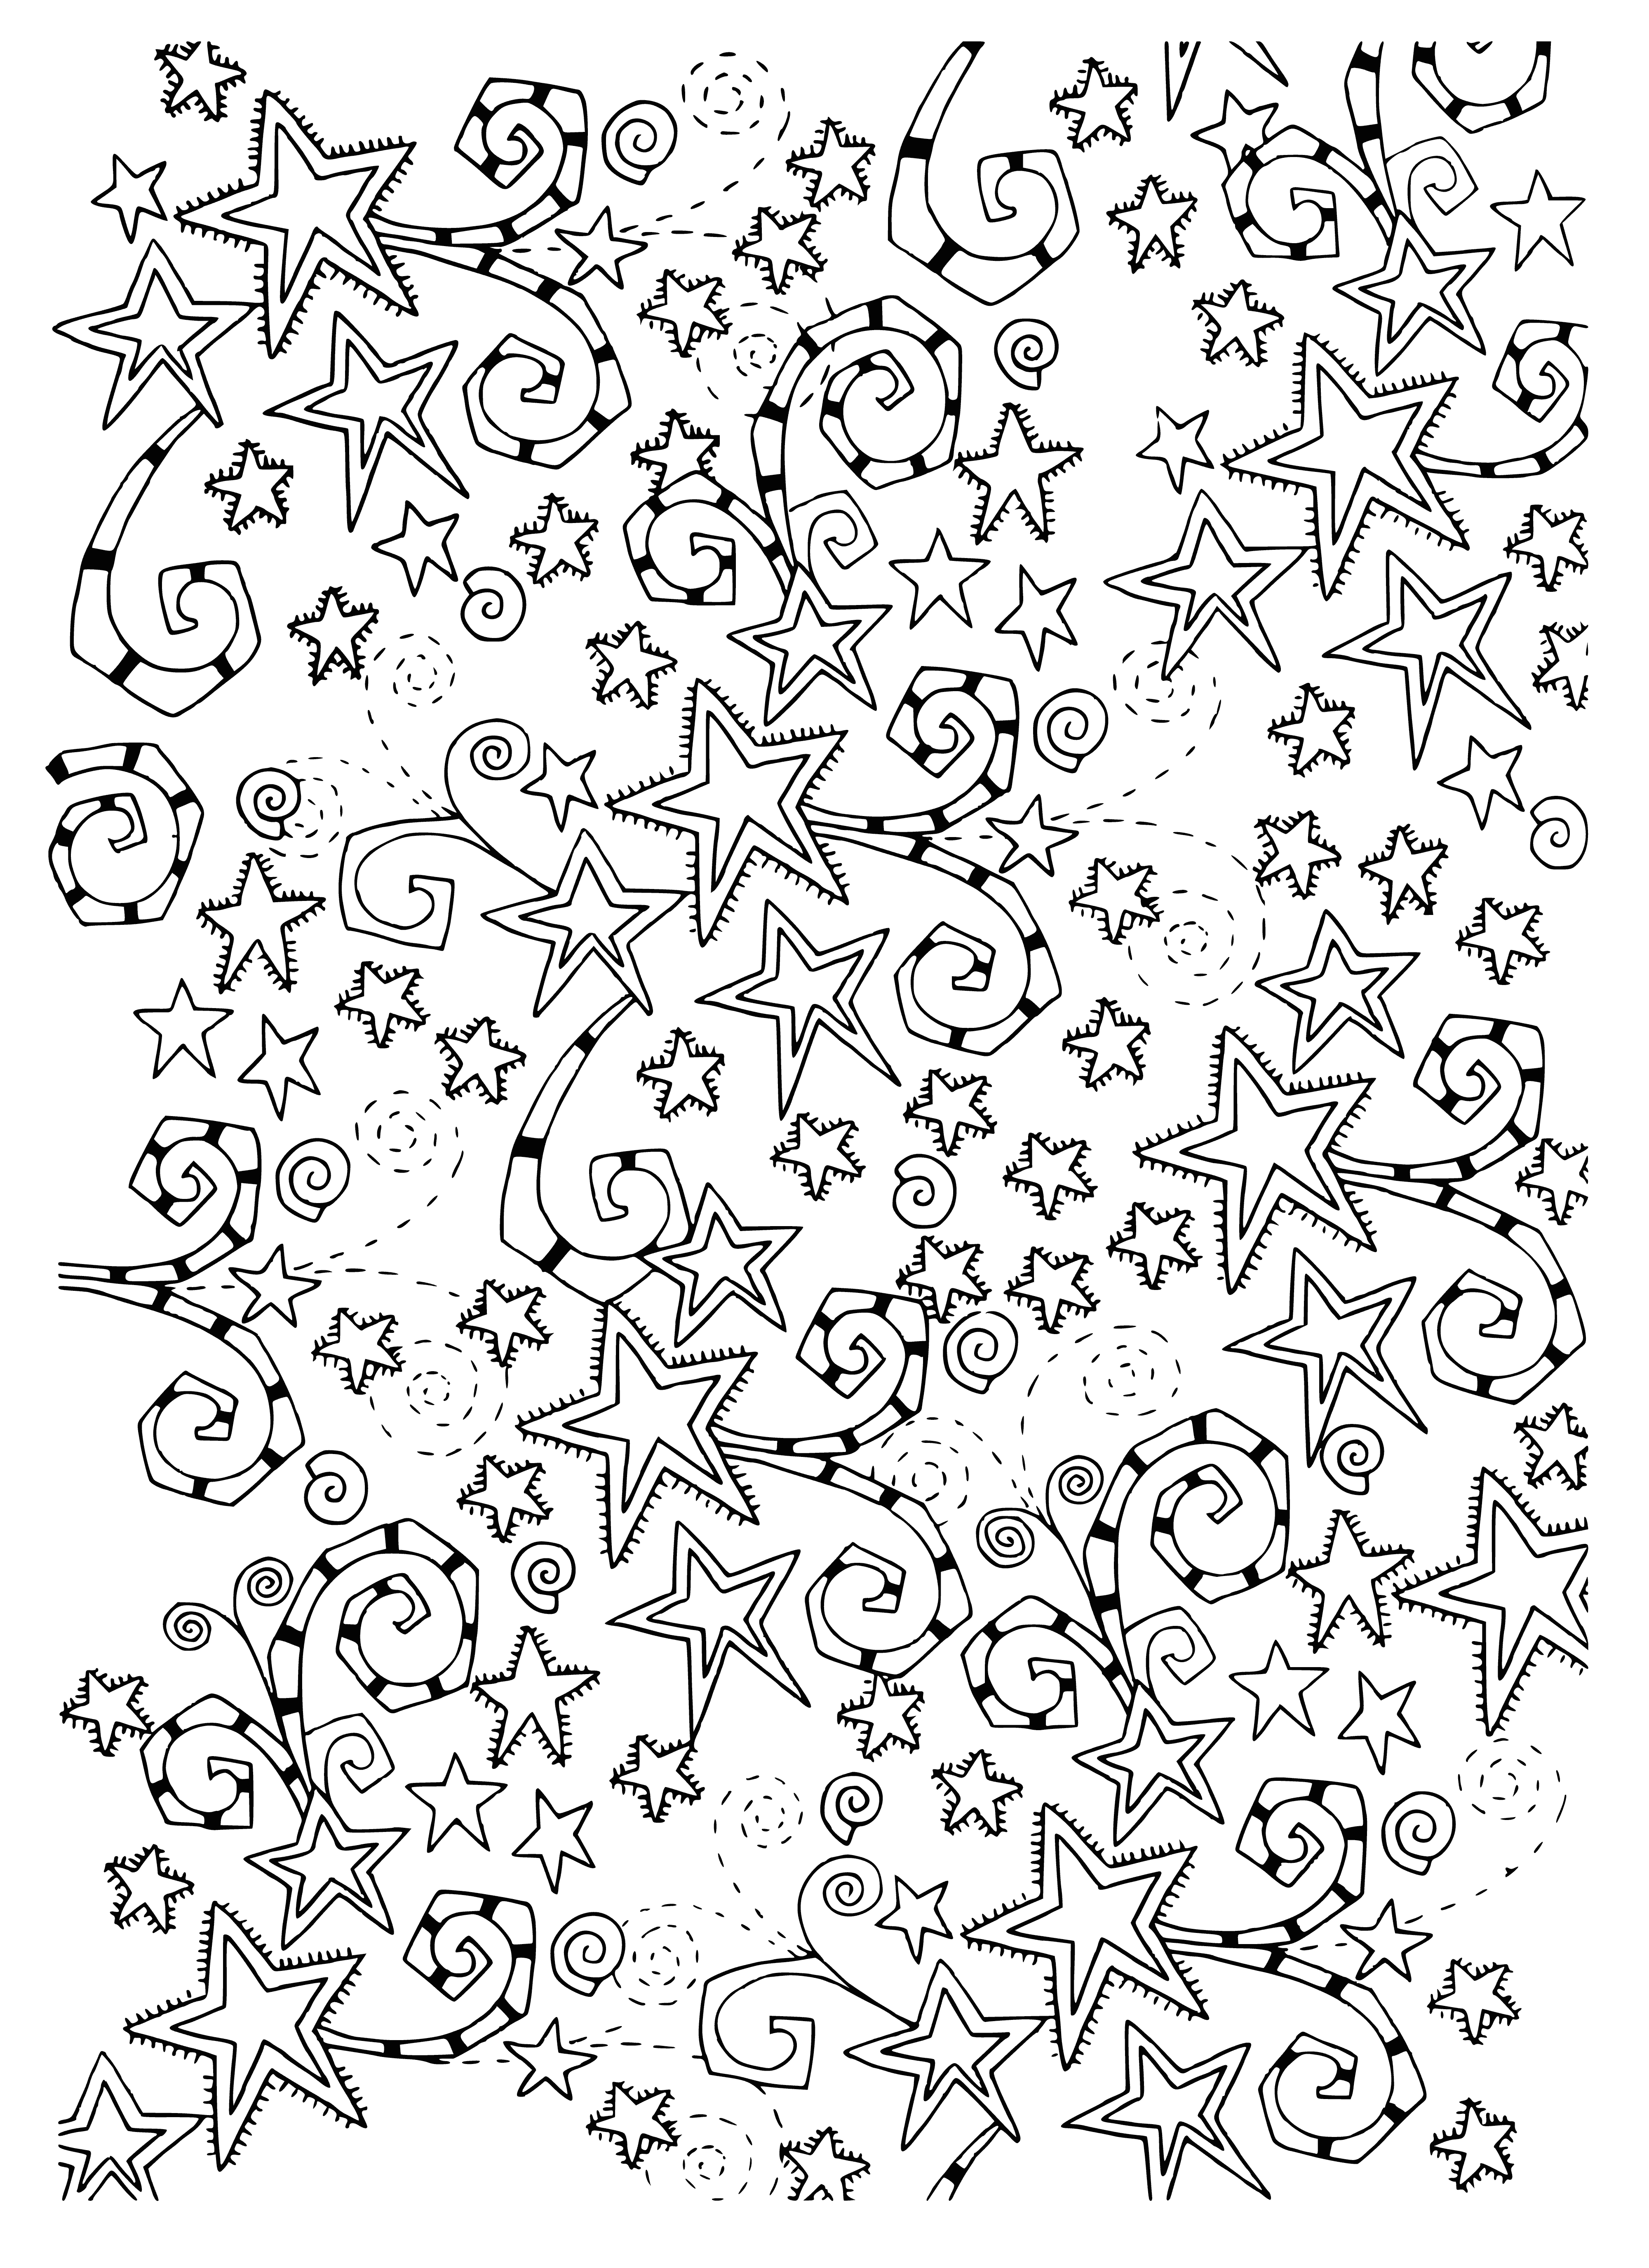 coloring page: Adult Coloring Pages Antistress Space - Stars coloring page has a star-filled, outer space b/w coloring page to color. No people/objects.